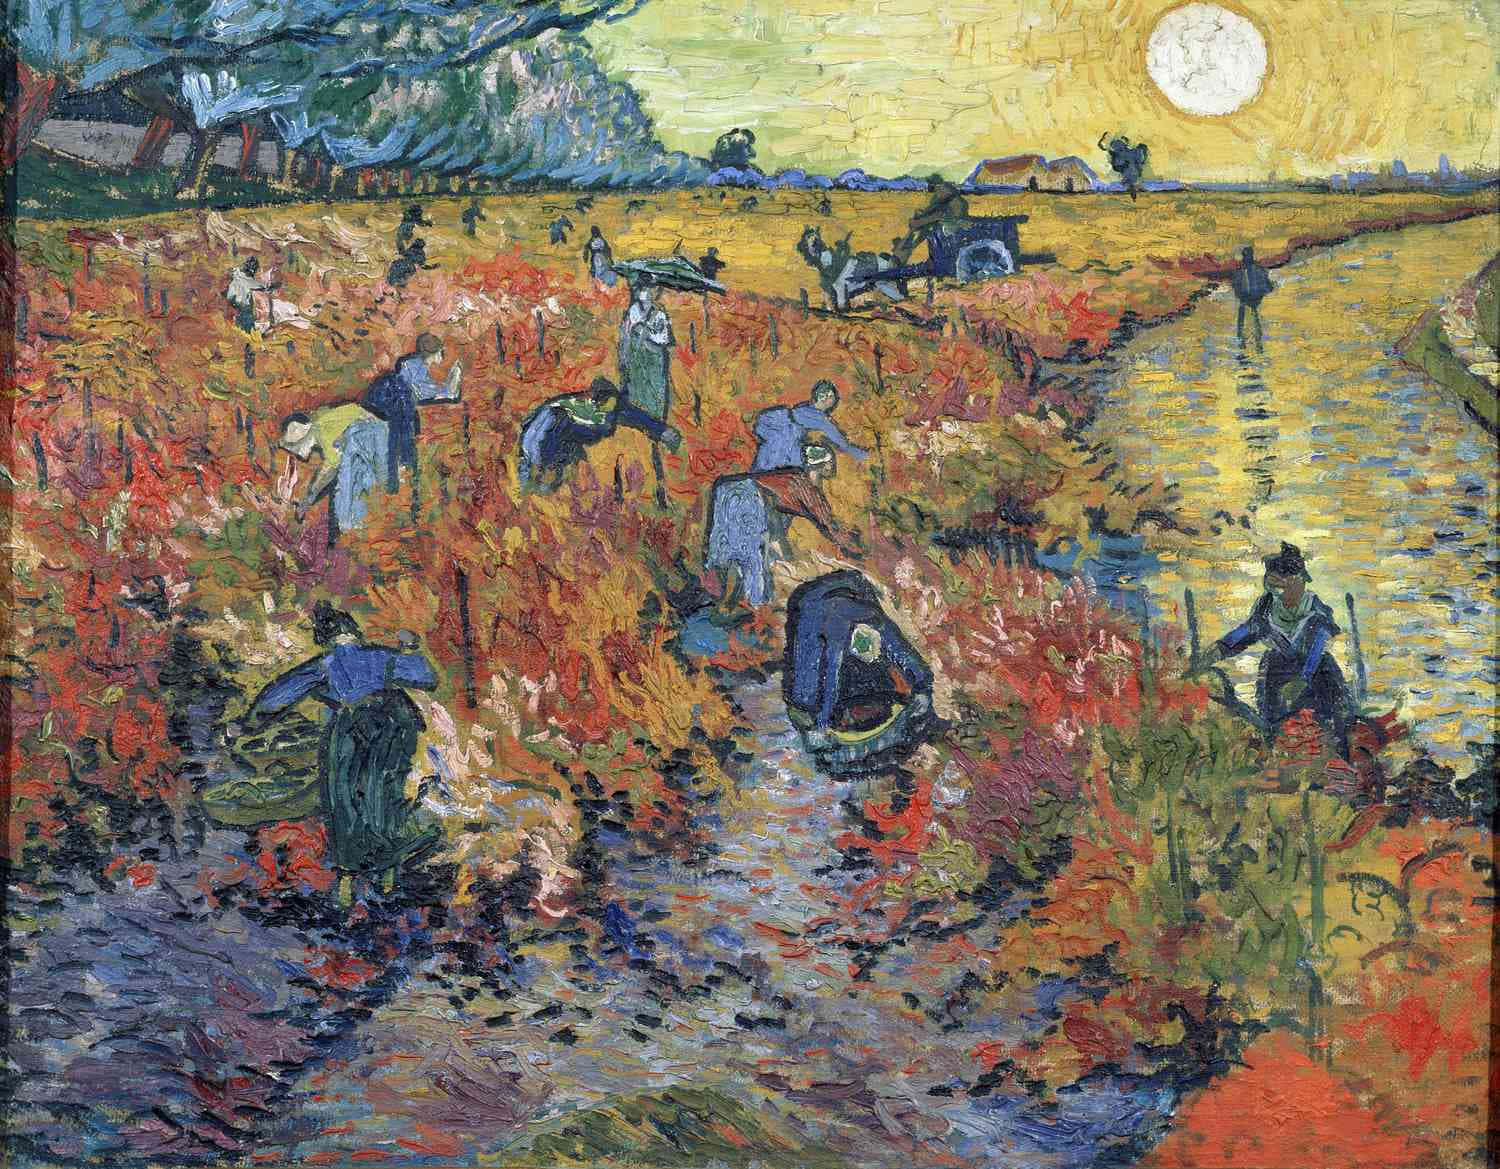 A Colorful Moonlit Night As Described By Vincent Van Gogh